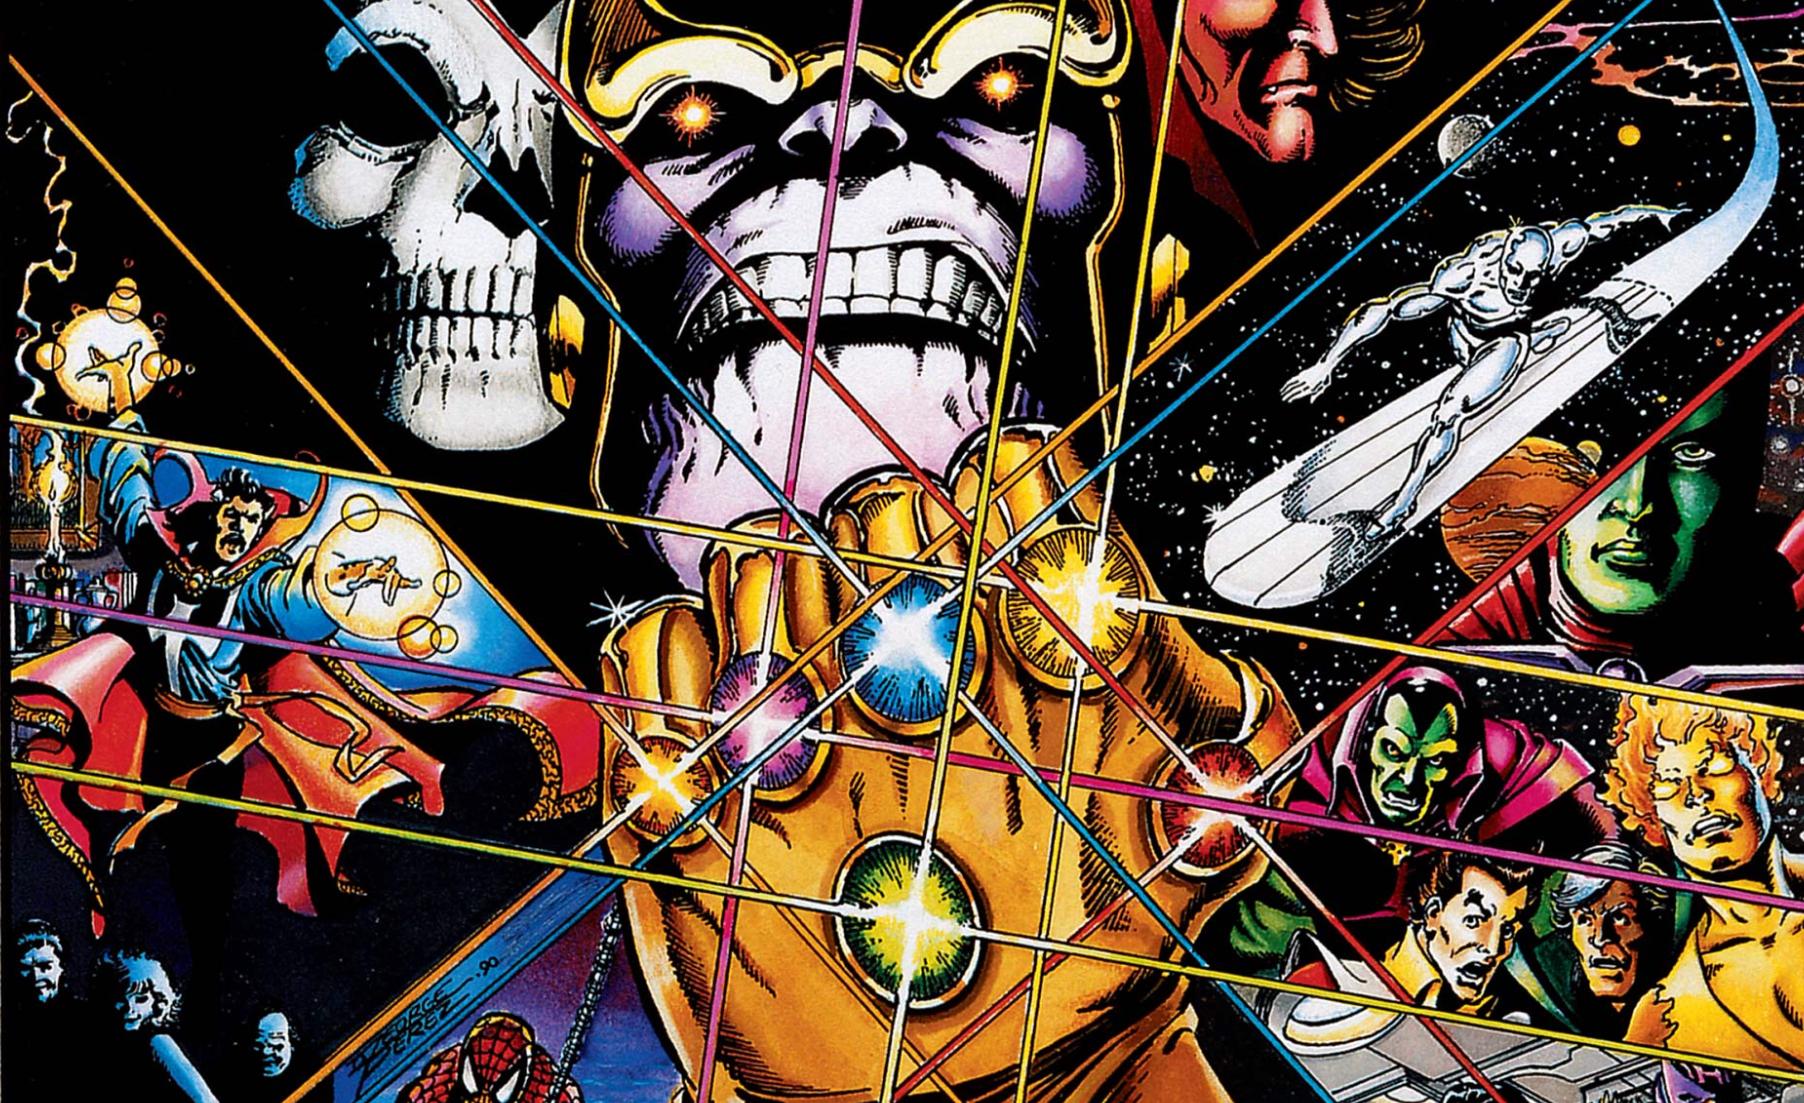 Thanos and other Marvel characters on the Cover of Infinity Gauntlet #1, Marvel Comics, 1991.